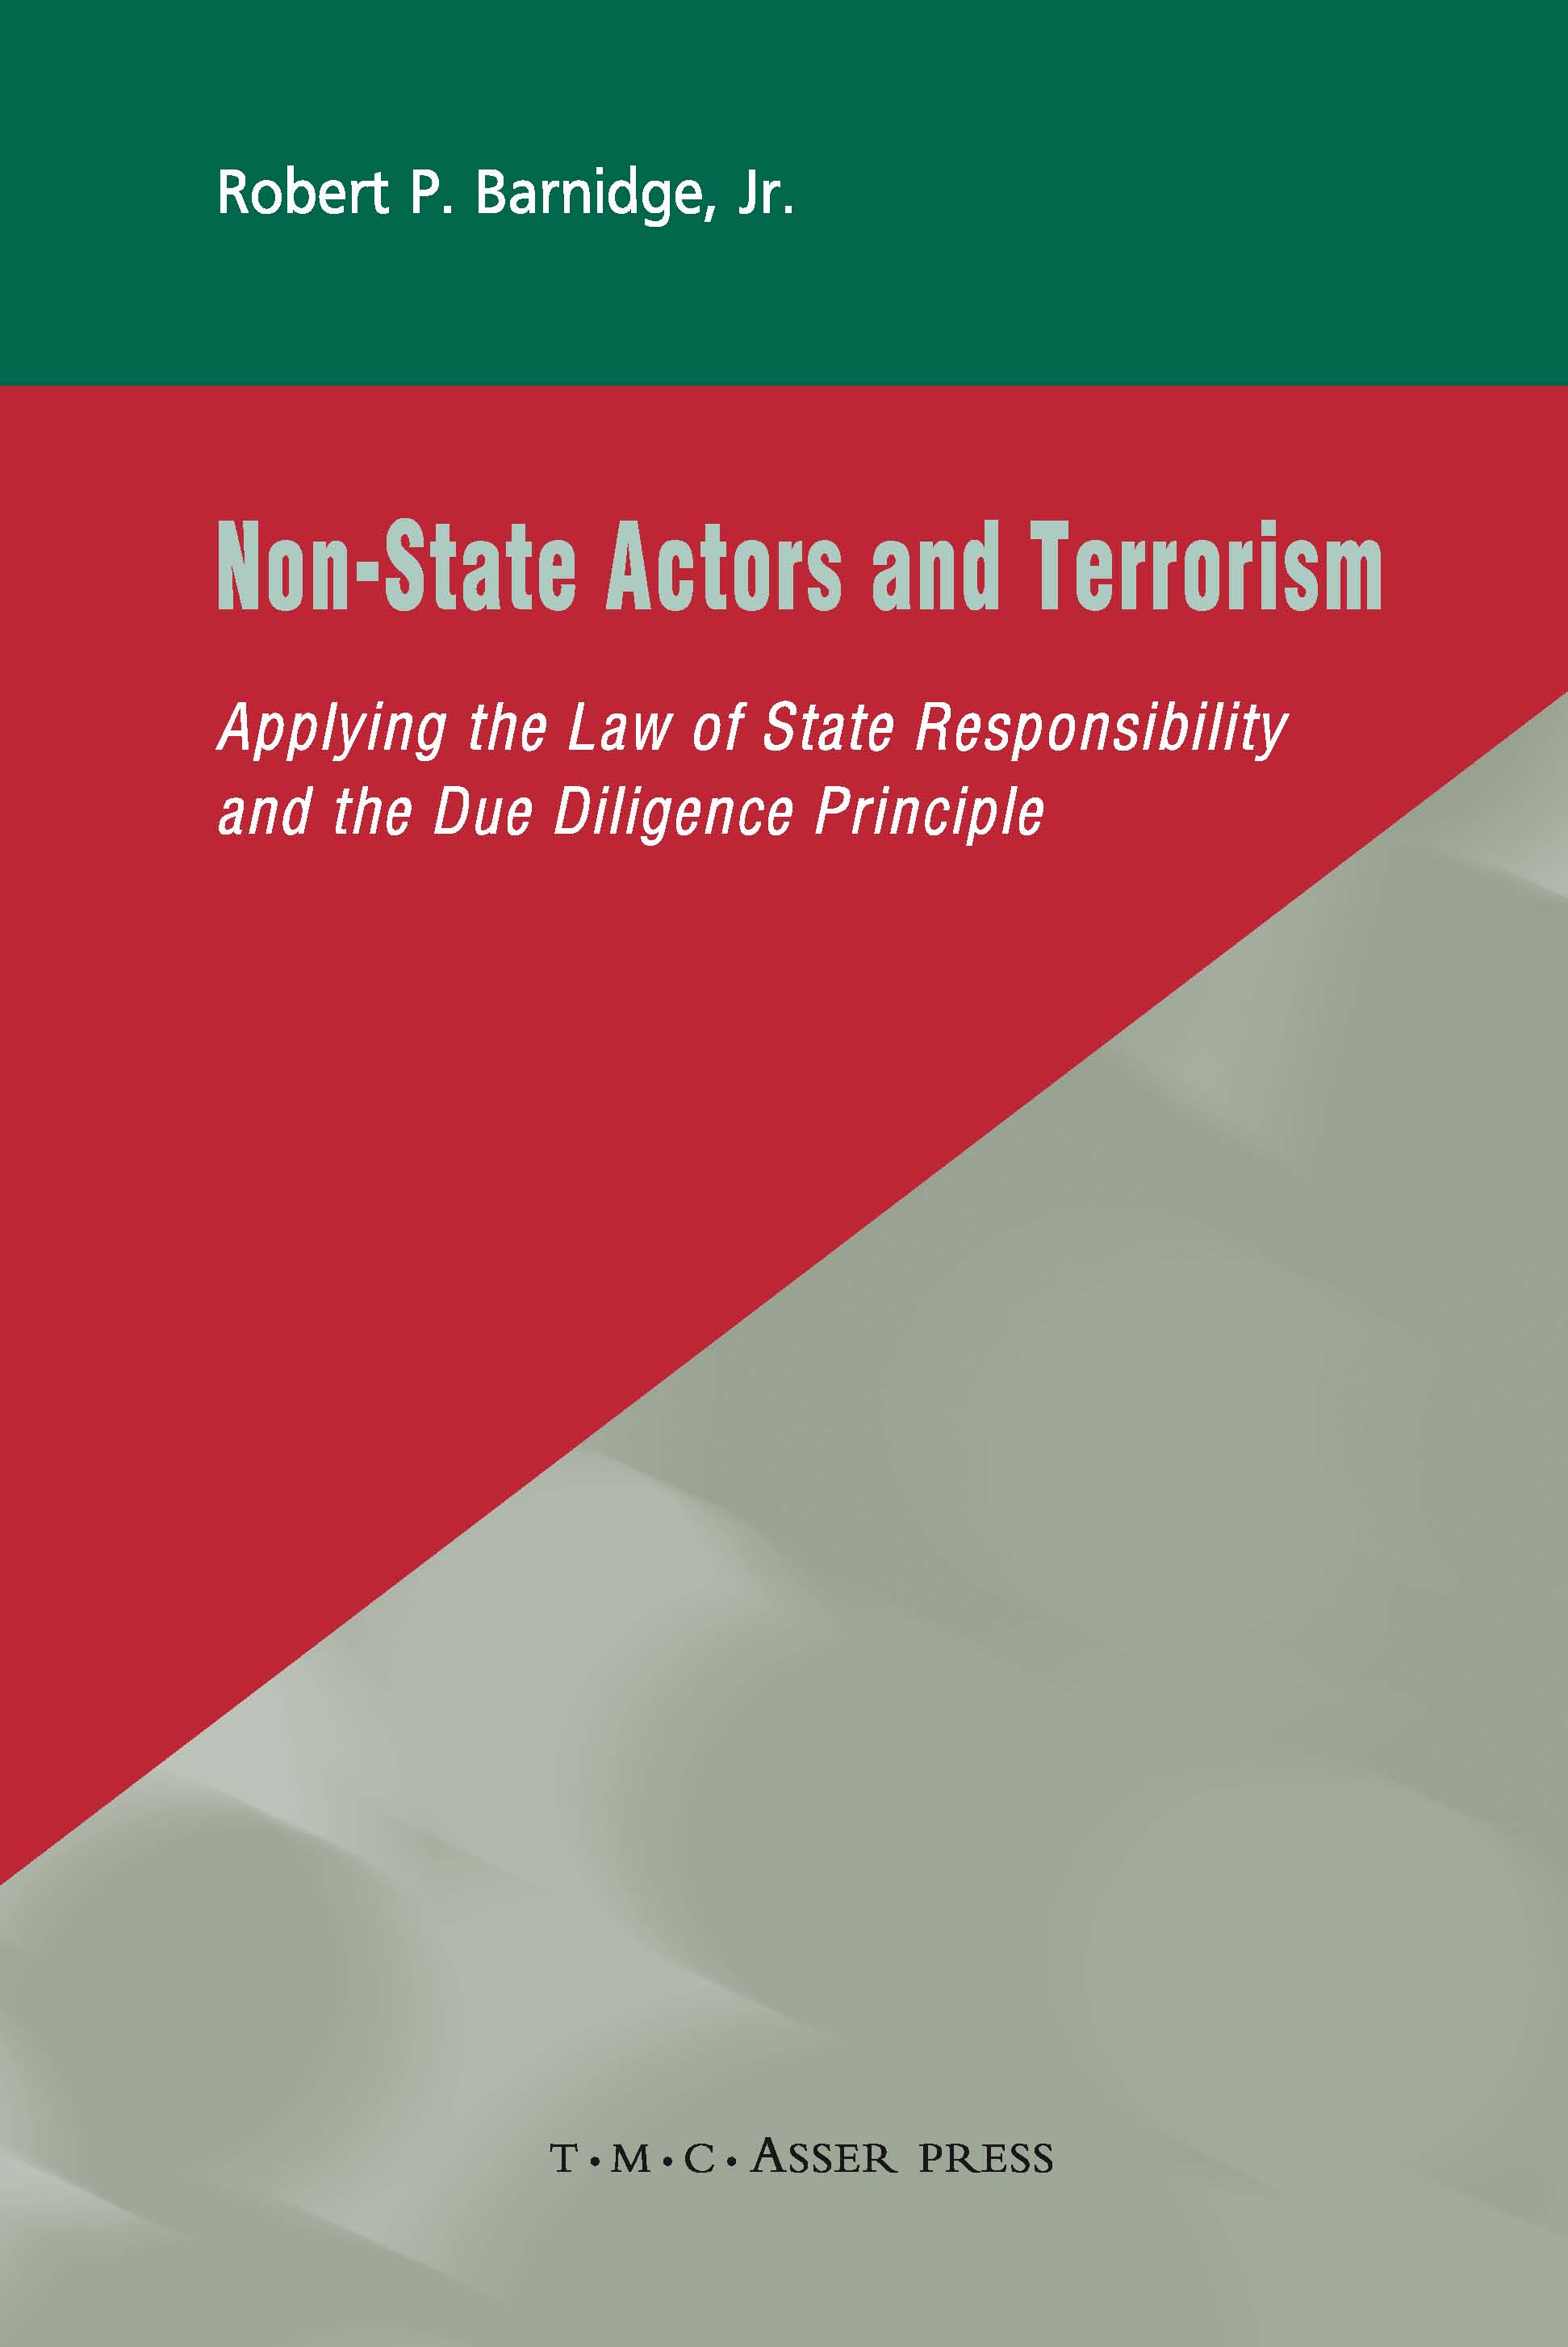 Non-State Actors and Terrorism - Applying the Law of State Responsibility and the Due Diligence Principle